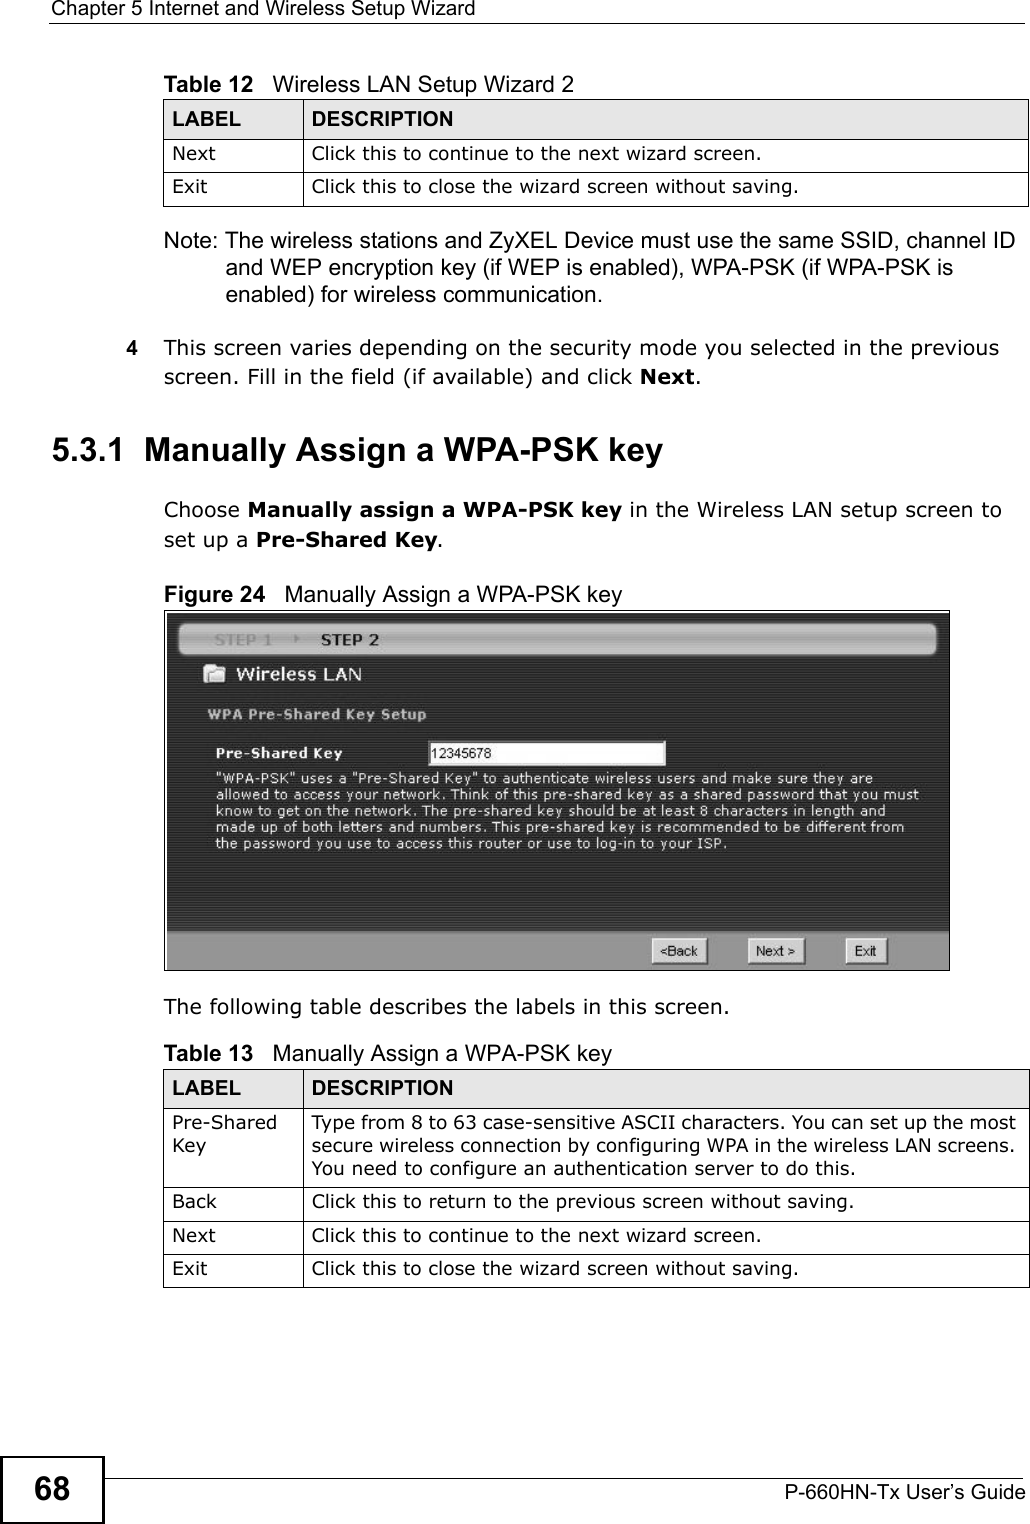 Chapter 5 Internet and Wireless Setup WizardP-660HN-Tx User’s Guide68Note: The wireless stations and ZyXEL Device must use the same SSID, channel ID and WEP encryption key (if WEP is enabled), WPA-PSK (if WPA-PSK is enabled) for wireless communication.4This screen varies depending on the security mode you selected in the previous screen. Fill in the field (if available) and click Next.5.3.1  Manually Assign a WPA-PSK keyChoose Manually assign a WPA-PSK key in the Wireless LAN setup screen to set up a Pre-Shared Key.Figure 24   Manually Assign a WPA-PSK keyThe following table describes the labels in this screen. Next Click this to continue to the next wizard screen.Exit Click this to close the wizard screen without saving.Table 12   Wireless LAN Setup Wizard 2LABEL DESCRIPTIONTable 13   Manually Assign a WPA-PSK keyLABEL DESCRIPTIONPre-Shared KeyType from 8 to 63 case-sensitive ASCII characters. You can set up the most secure wireless connection by configuring WPA in the wireless LAN screens. You need to configure an authentication server to do this.Back Click this to return to the previous screen without saving.Next Click this to continue to the next wizard screen.Exit Click this to close the wizard screen without saving.